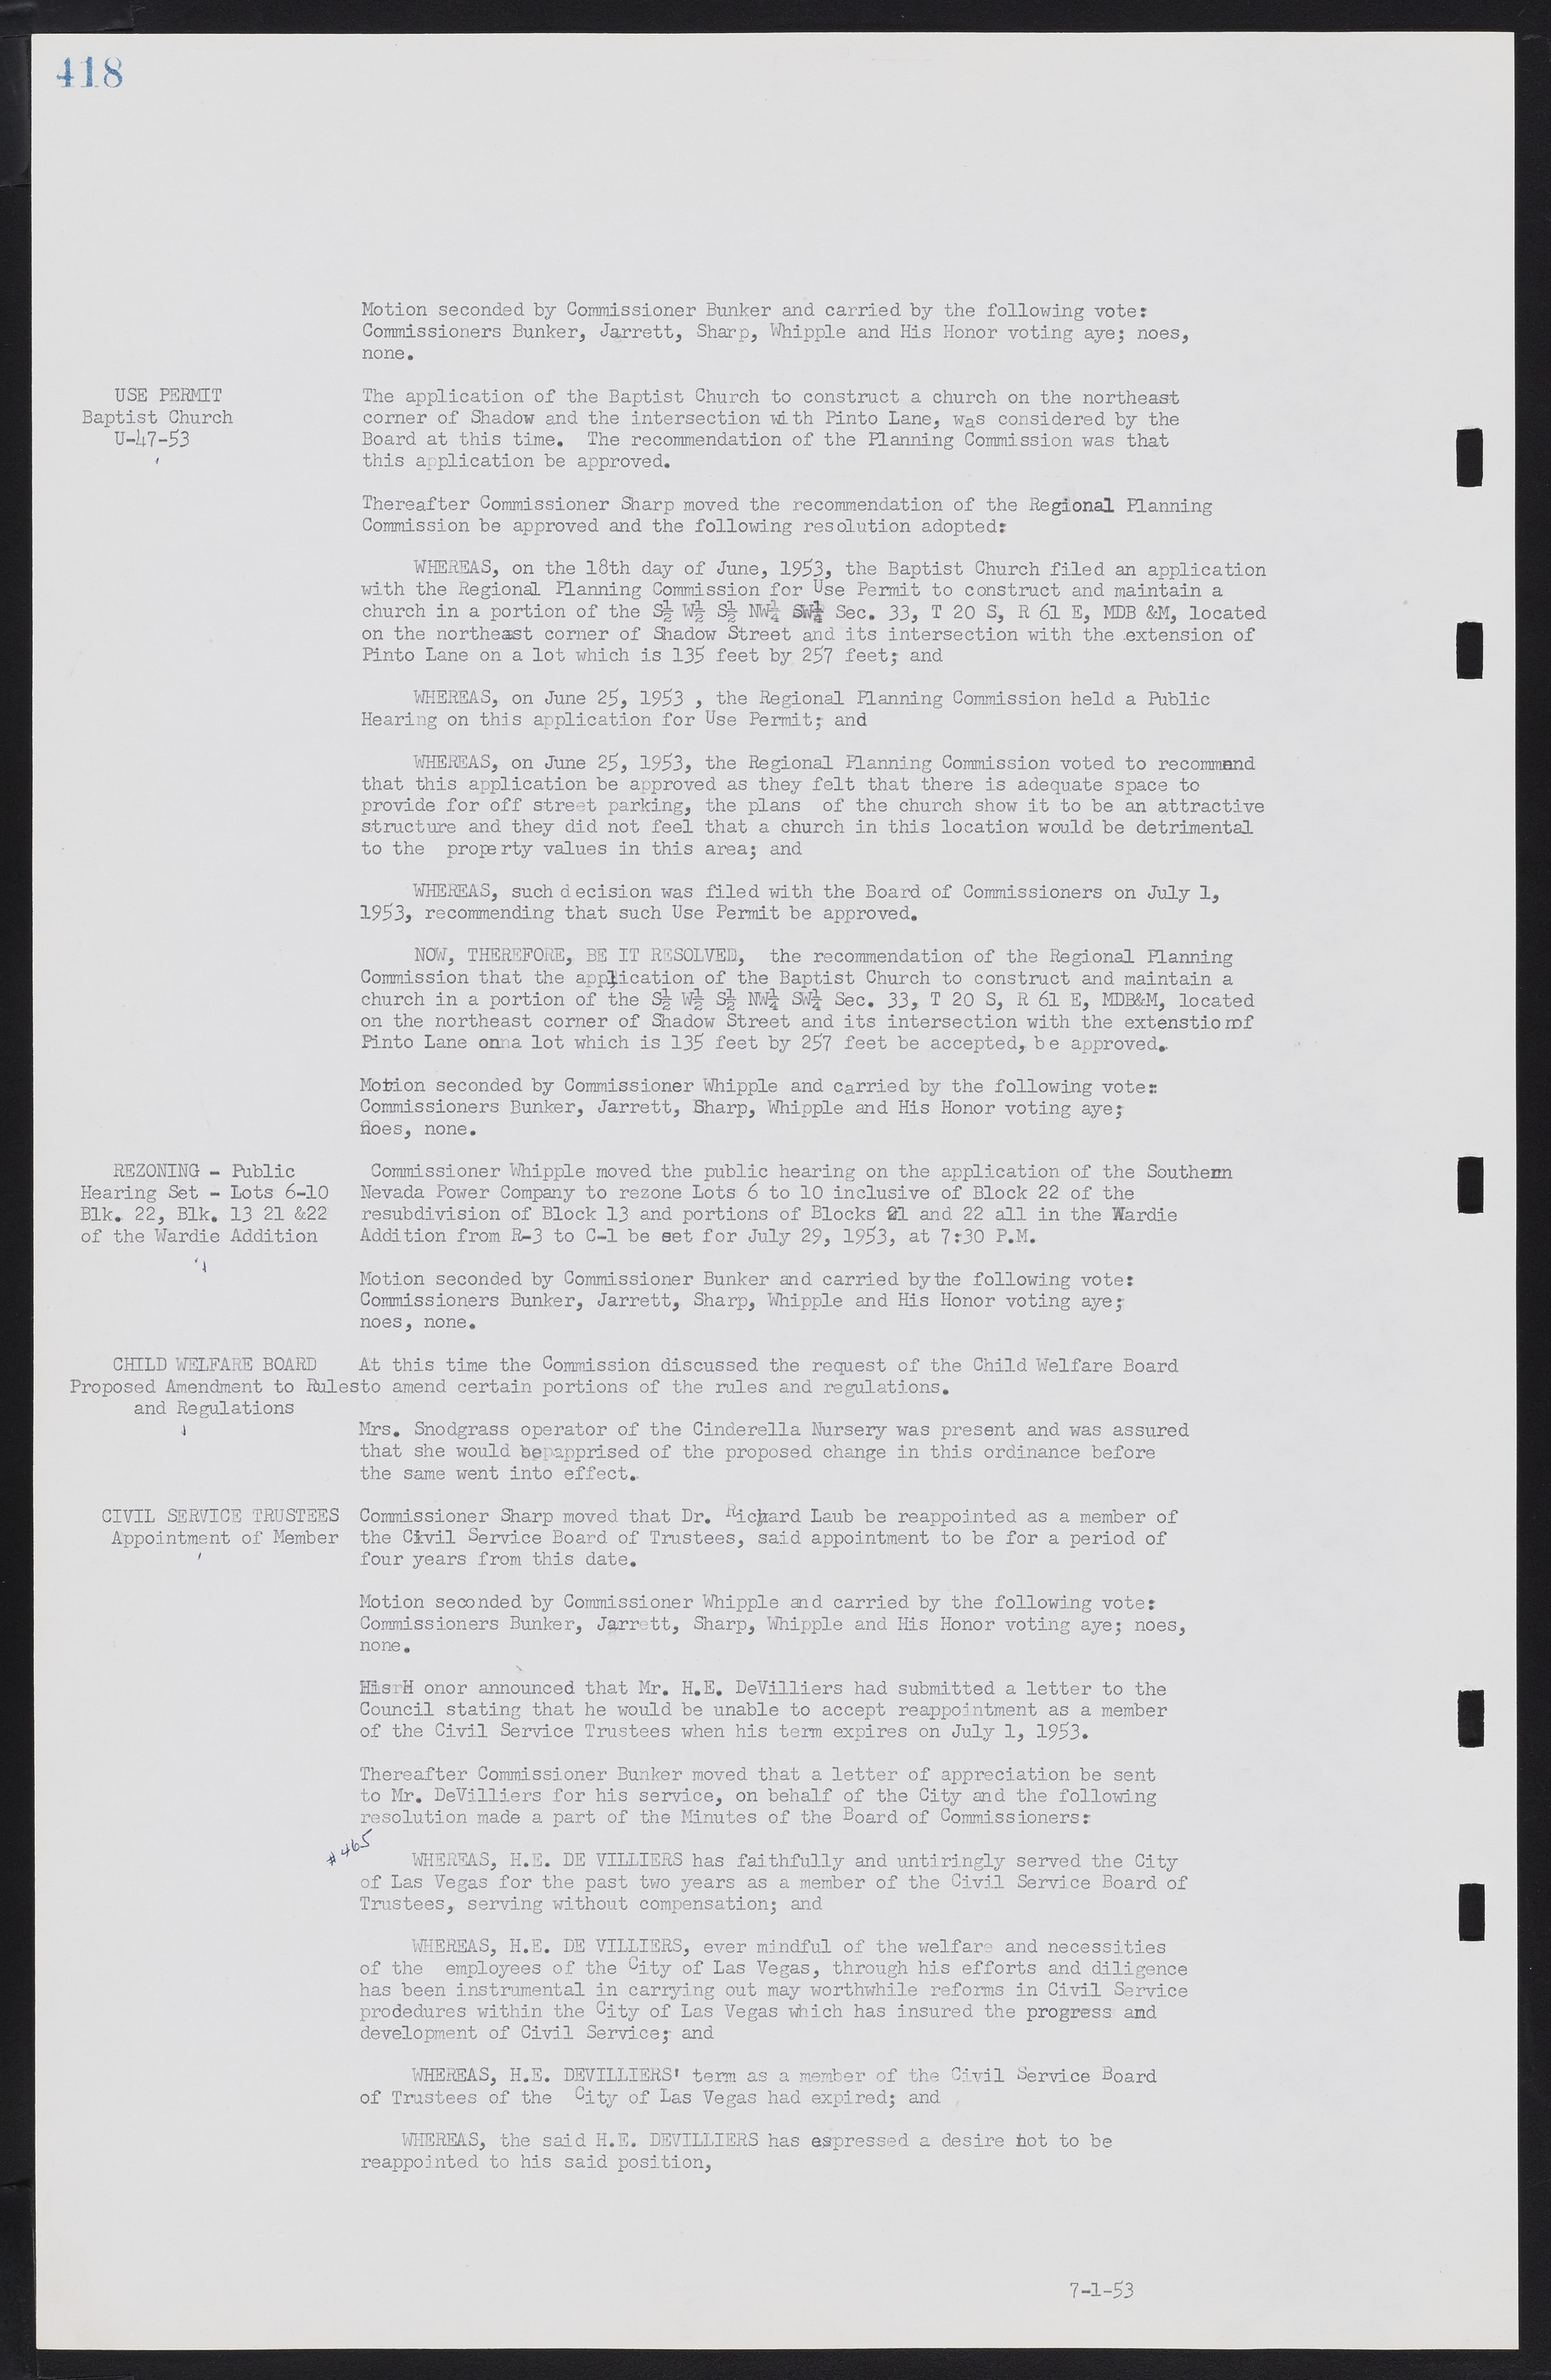 Las Vegas City Commission Minutes, May 26, 1952 to February 17, 1954, lvc000008-448